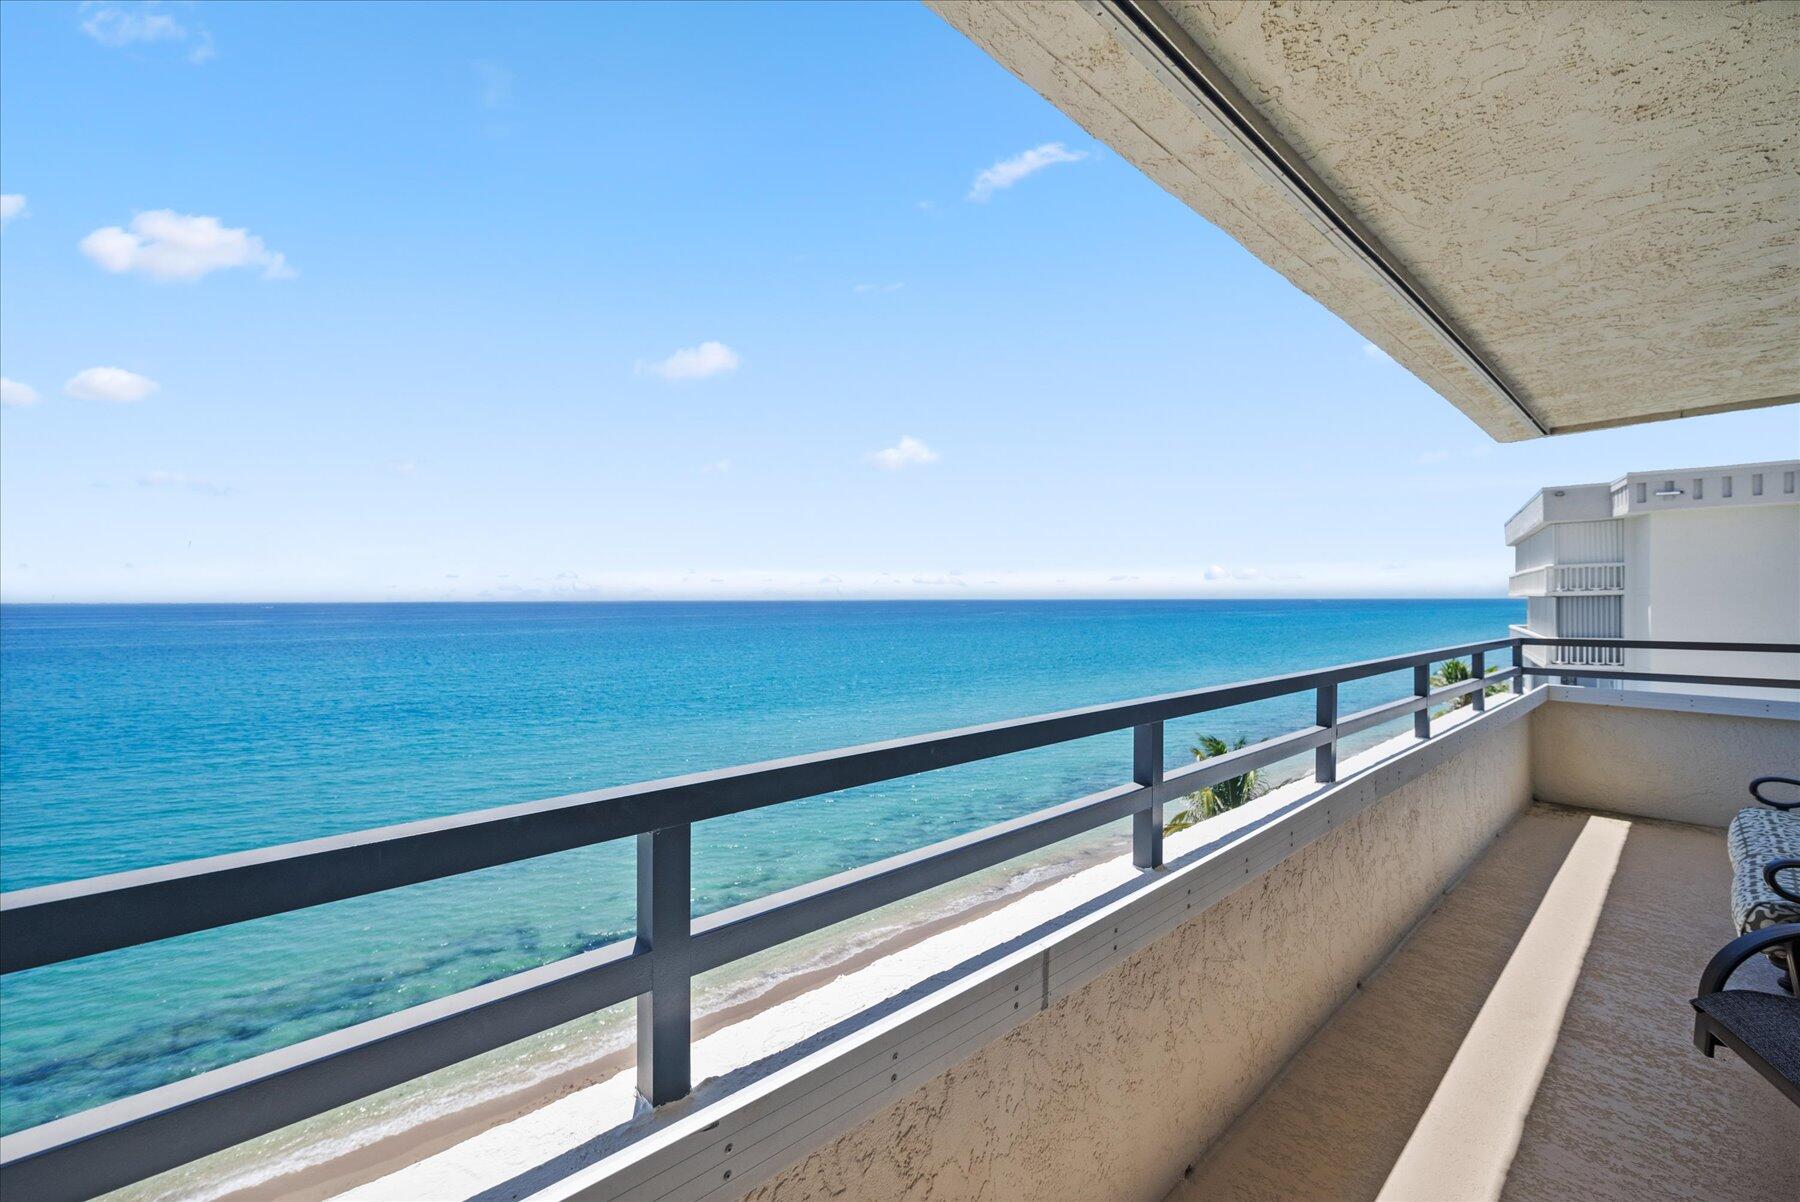 a view of a balcony with ocean view